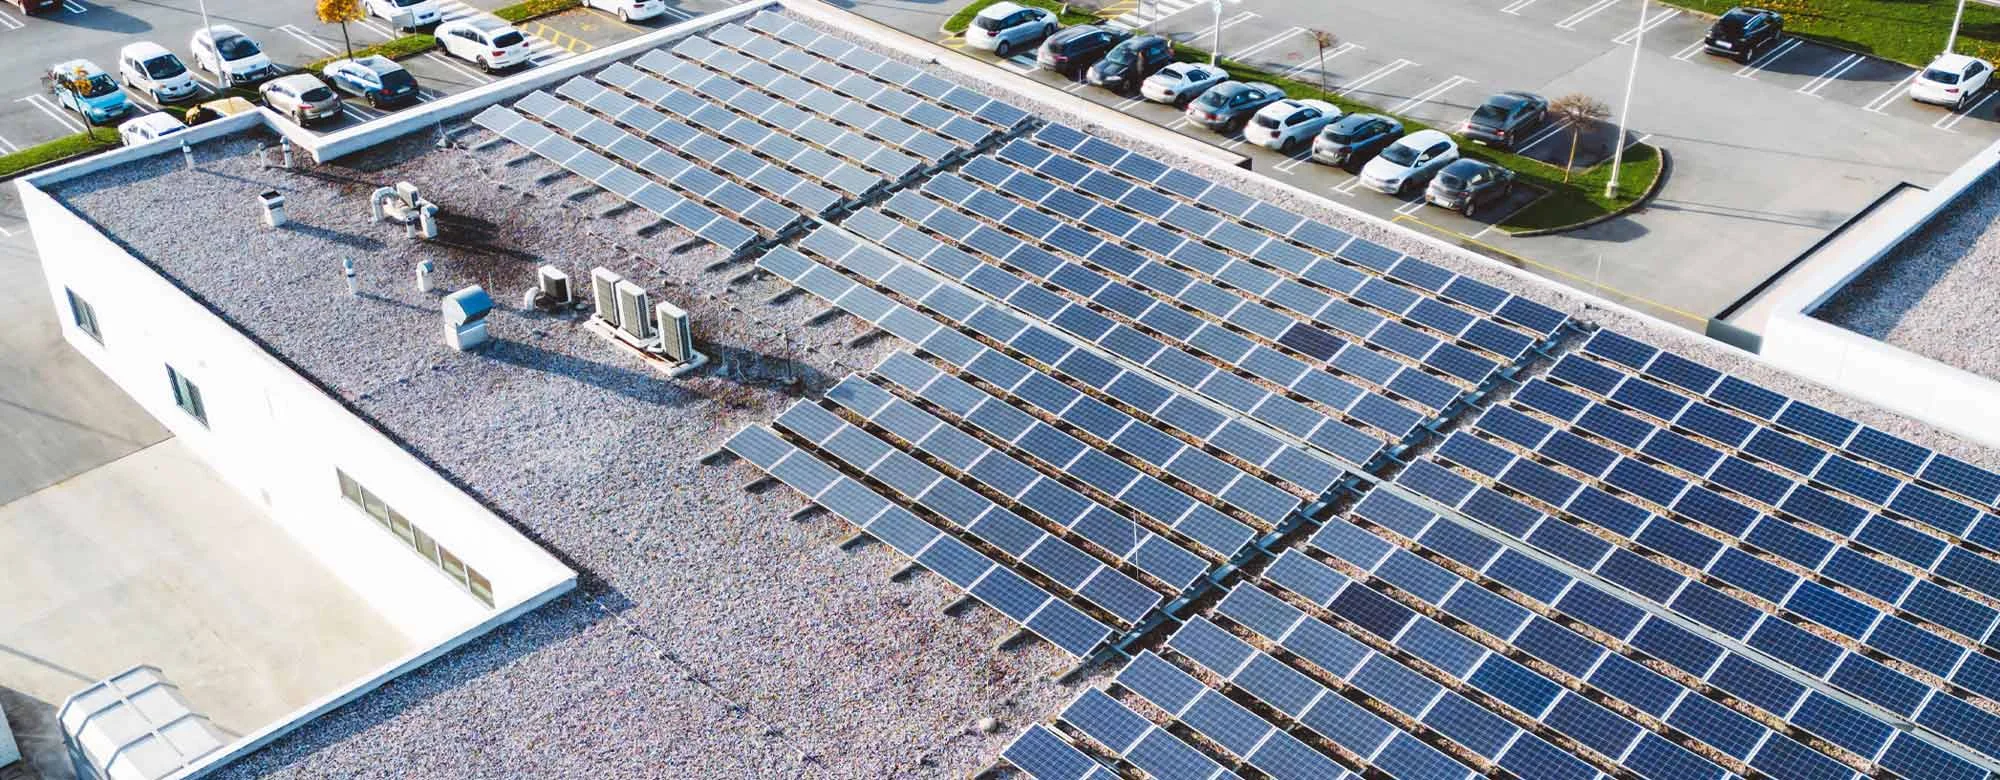 Aerial shot of factory roof with solar panels